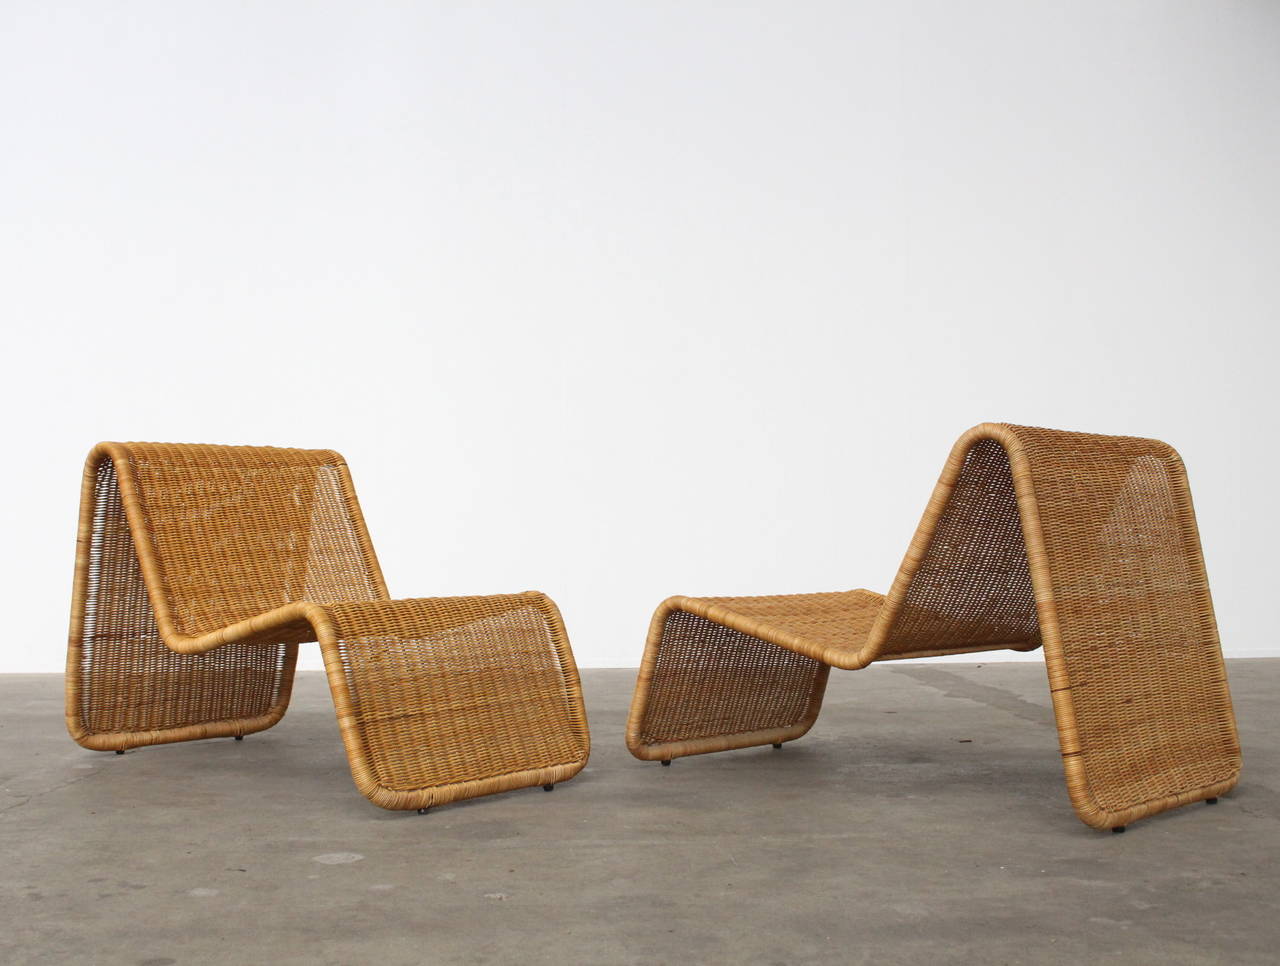 Wonderful pair of sculptural lounge chairs designed by Tito Agnoli for Bonacina. Tubular lacquered steel frame with woven wicker. This model can be used both indoors and outdoors. There are in total 6 identical available. The shipping price for 1 or